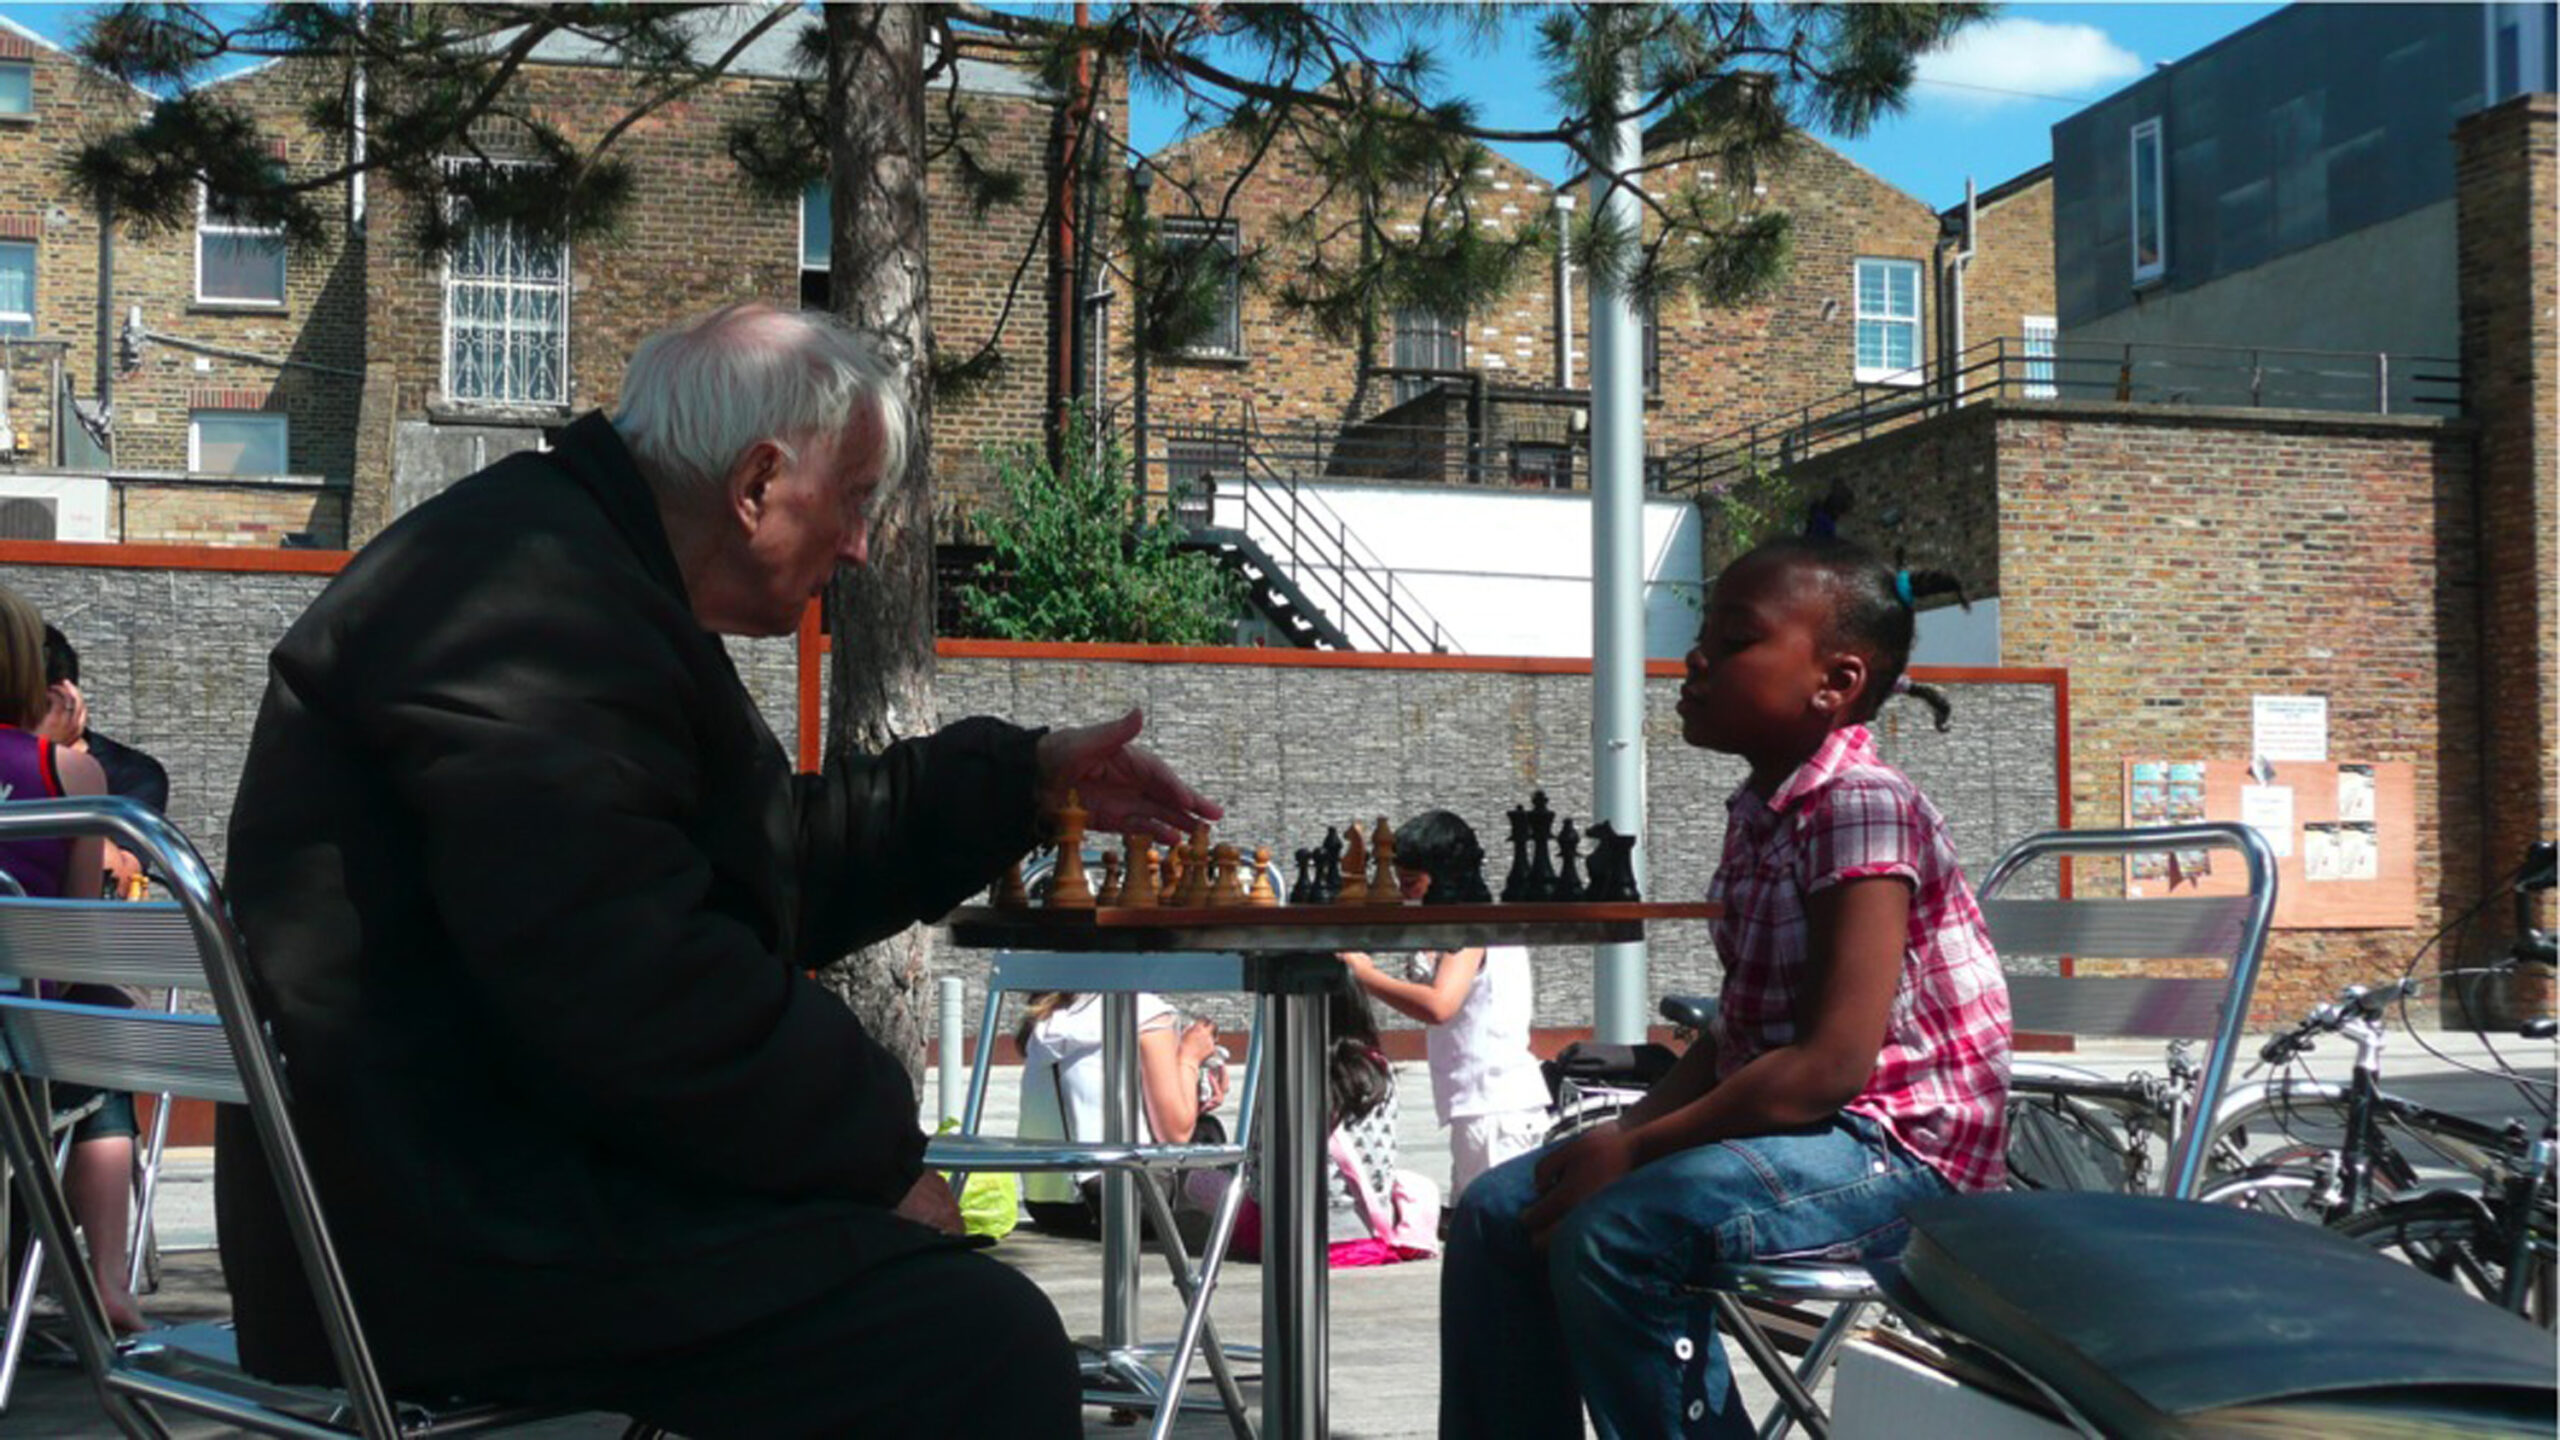 And older man and young child sat down and playing chess in Gillett Square